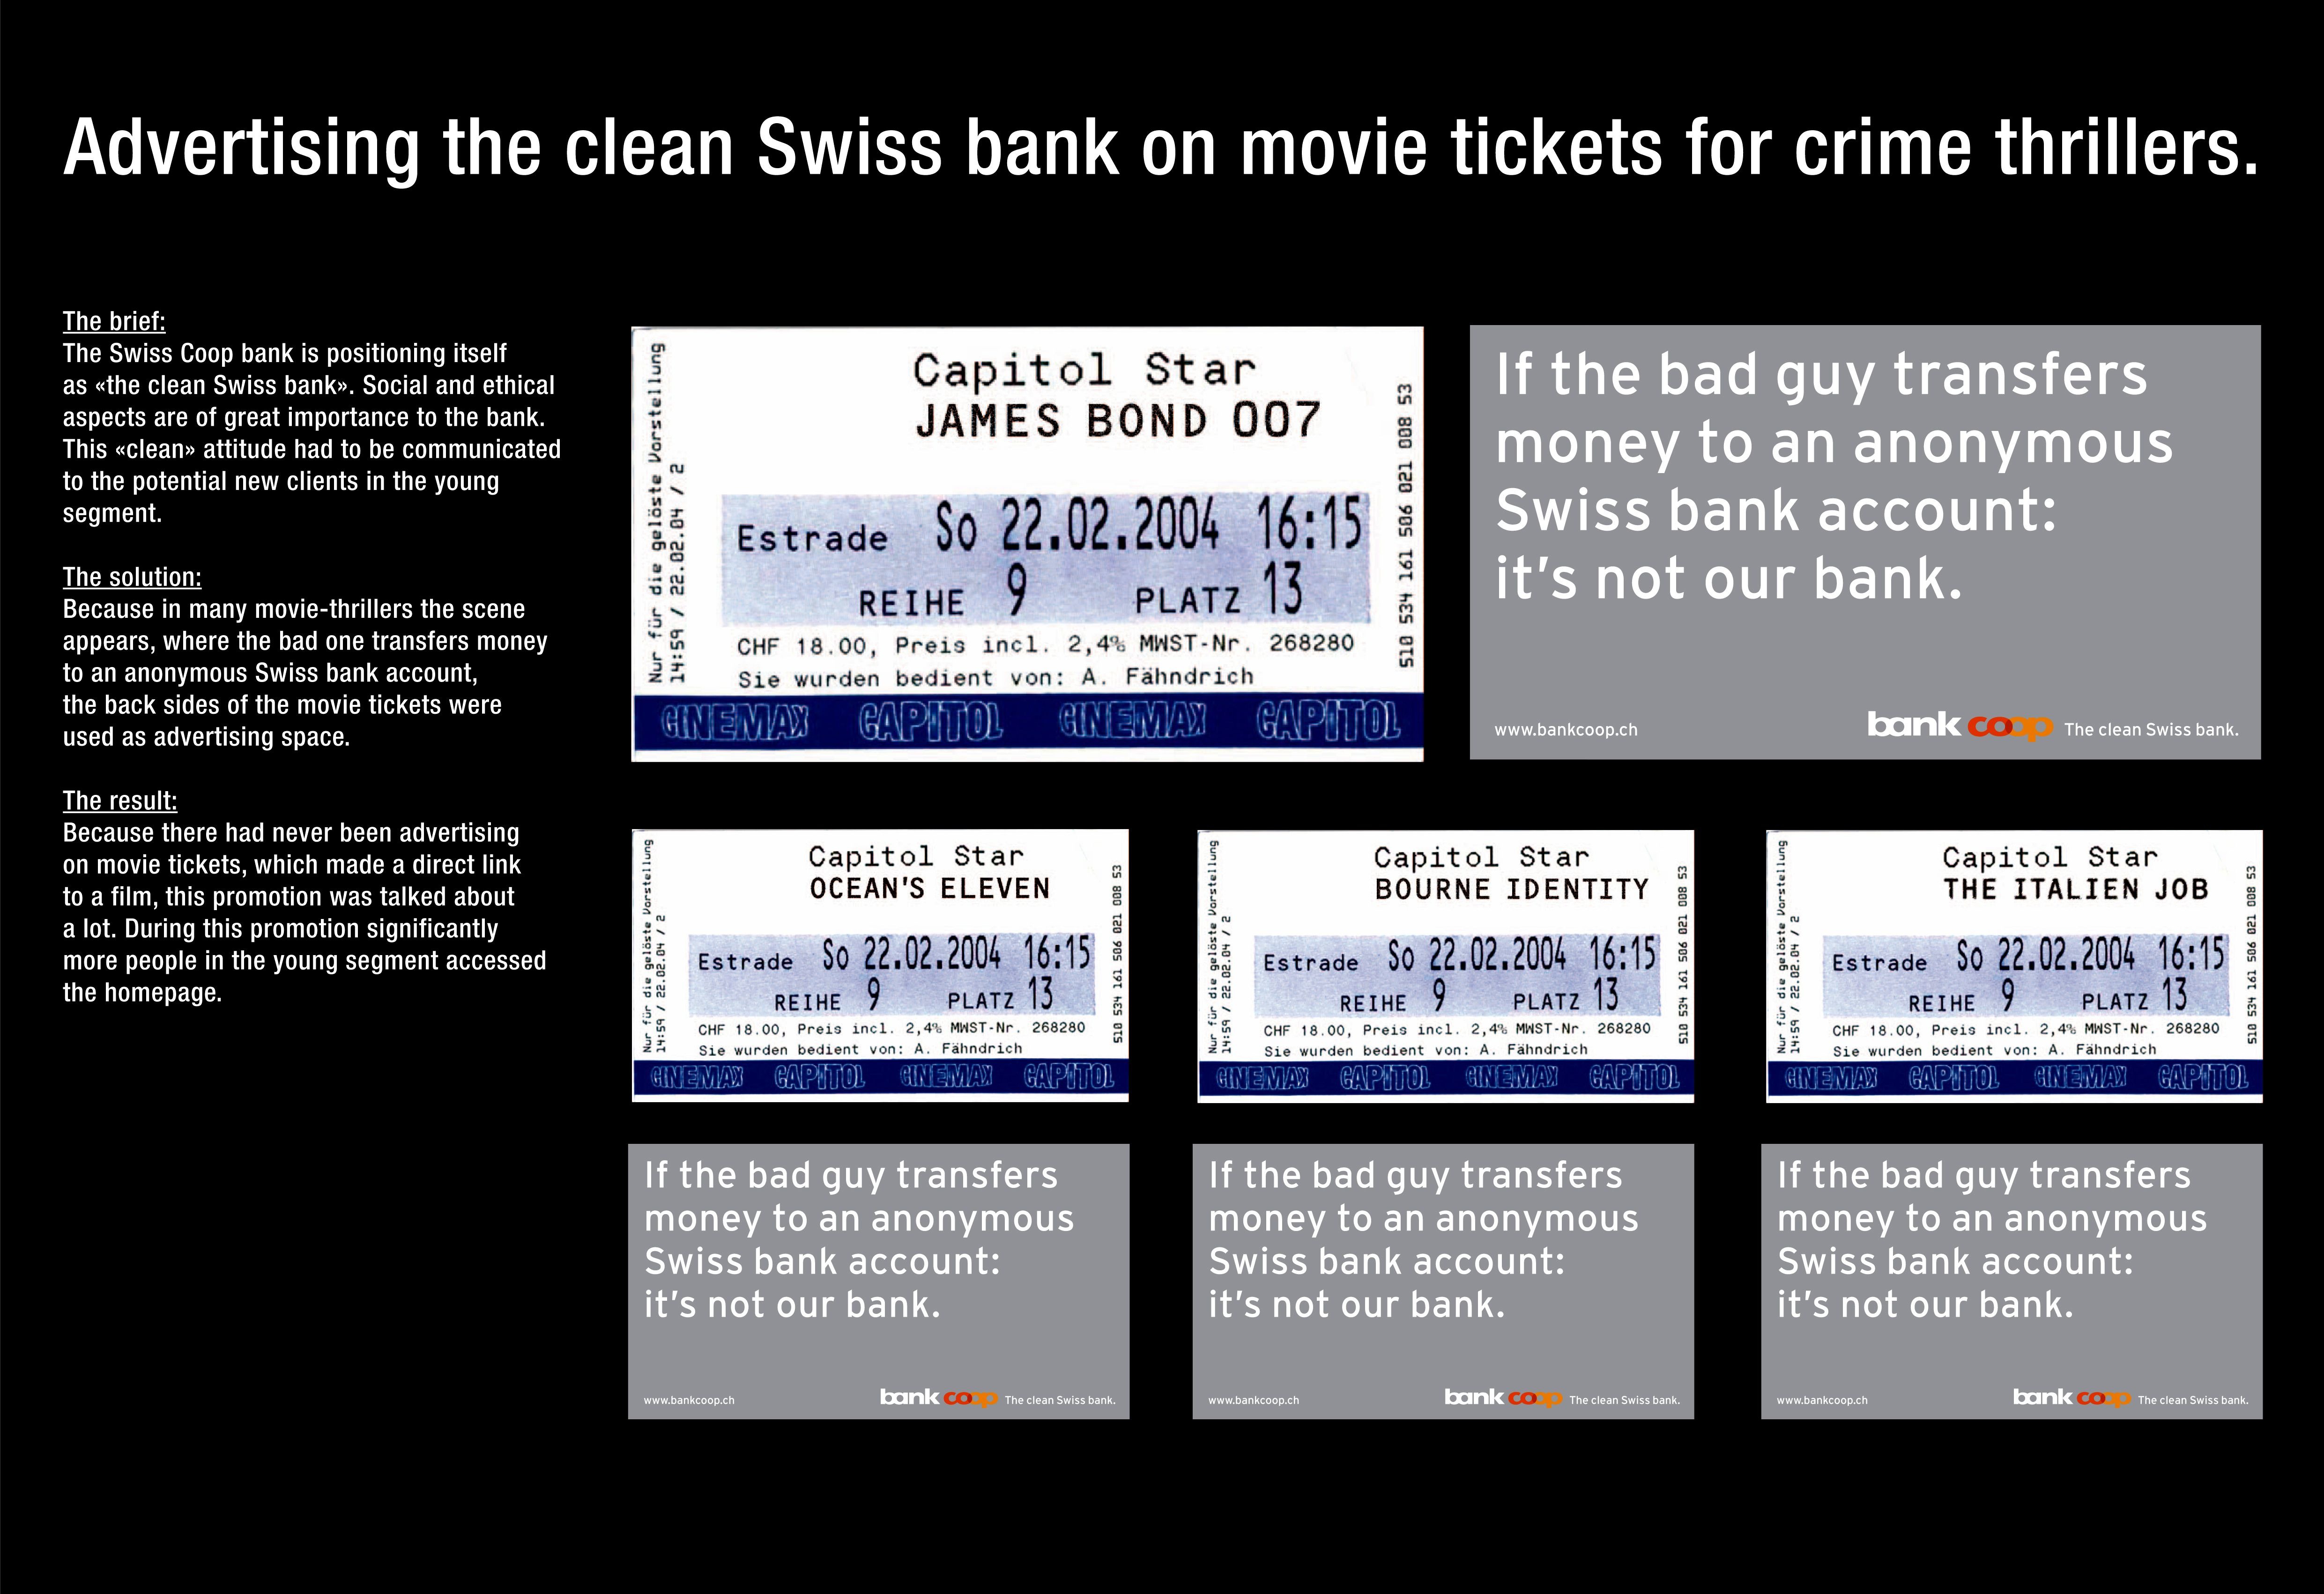 MOVIE TICKETS FOR CRIME THRILLERS